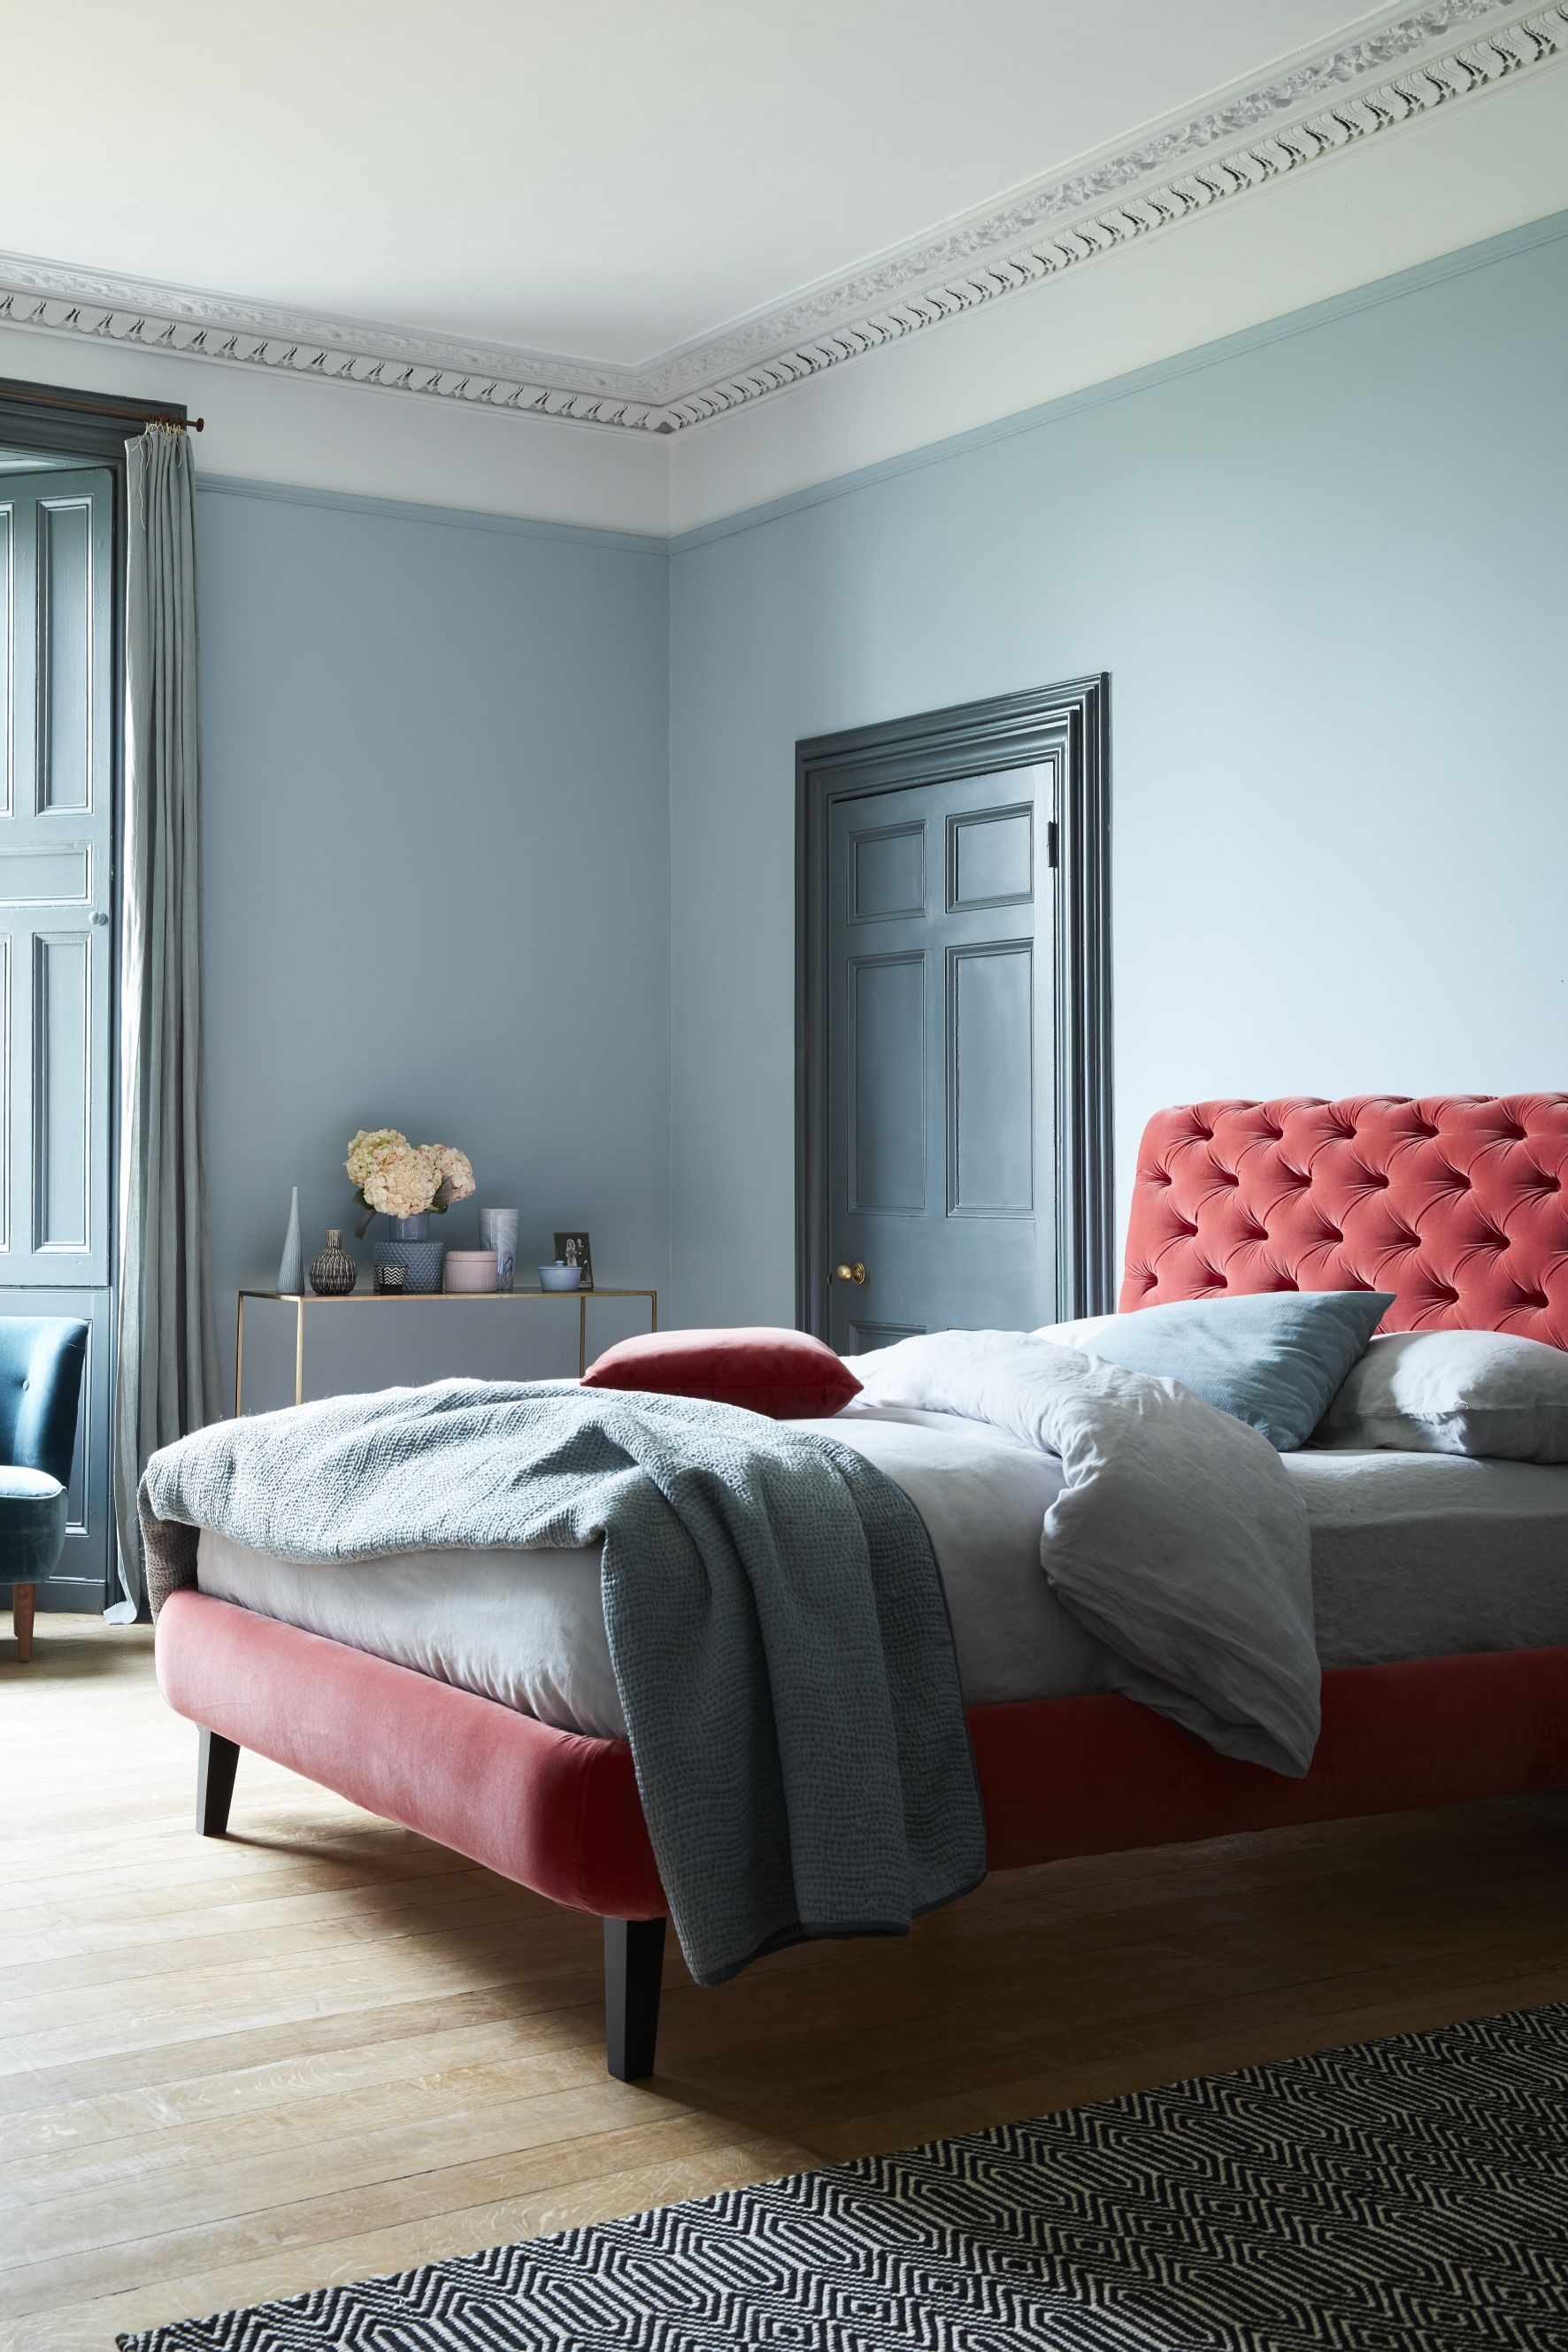 21 Colour Combinations To Try At Home - Colour Scheme Ideas